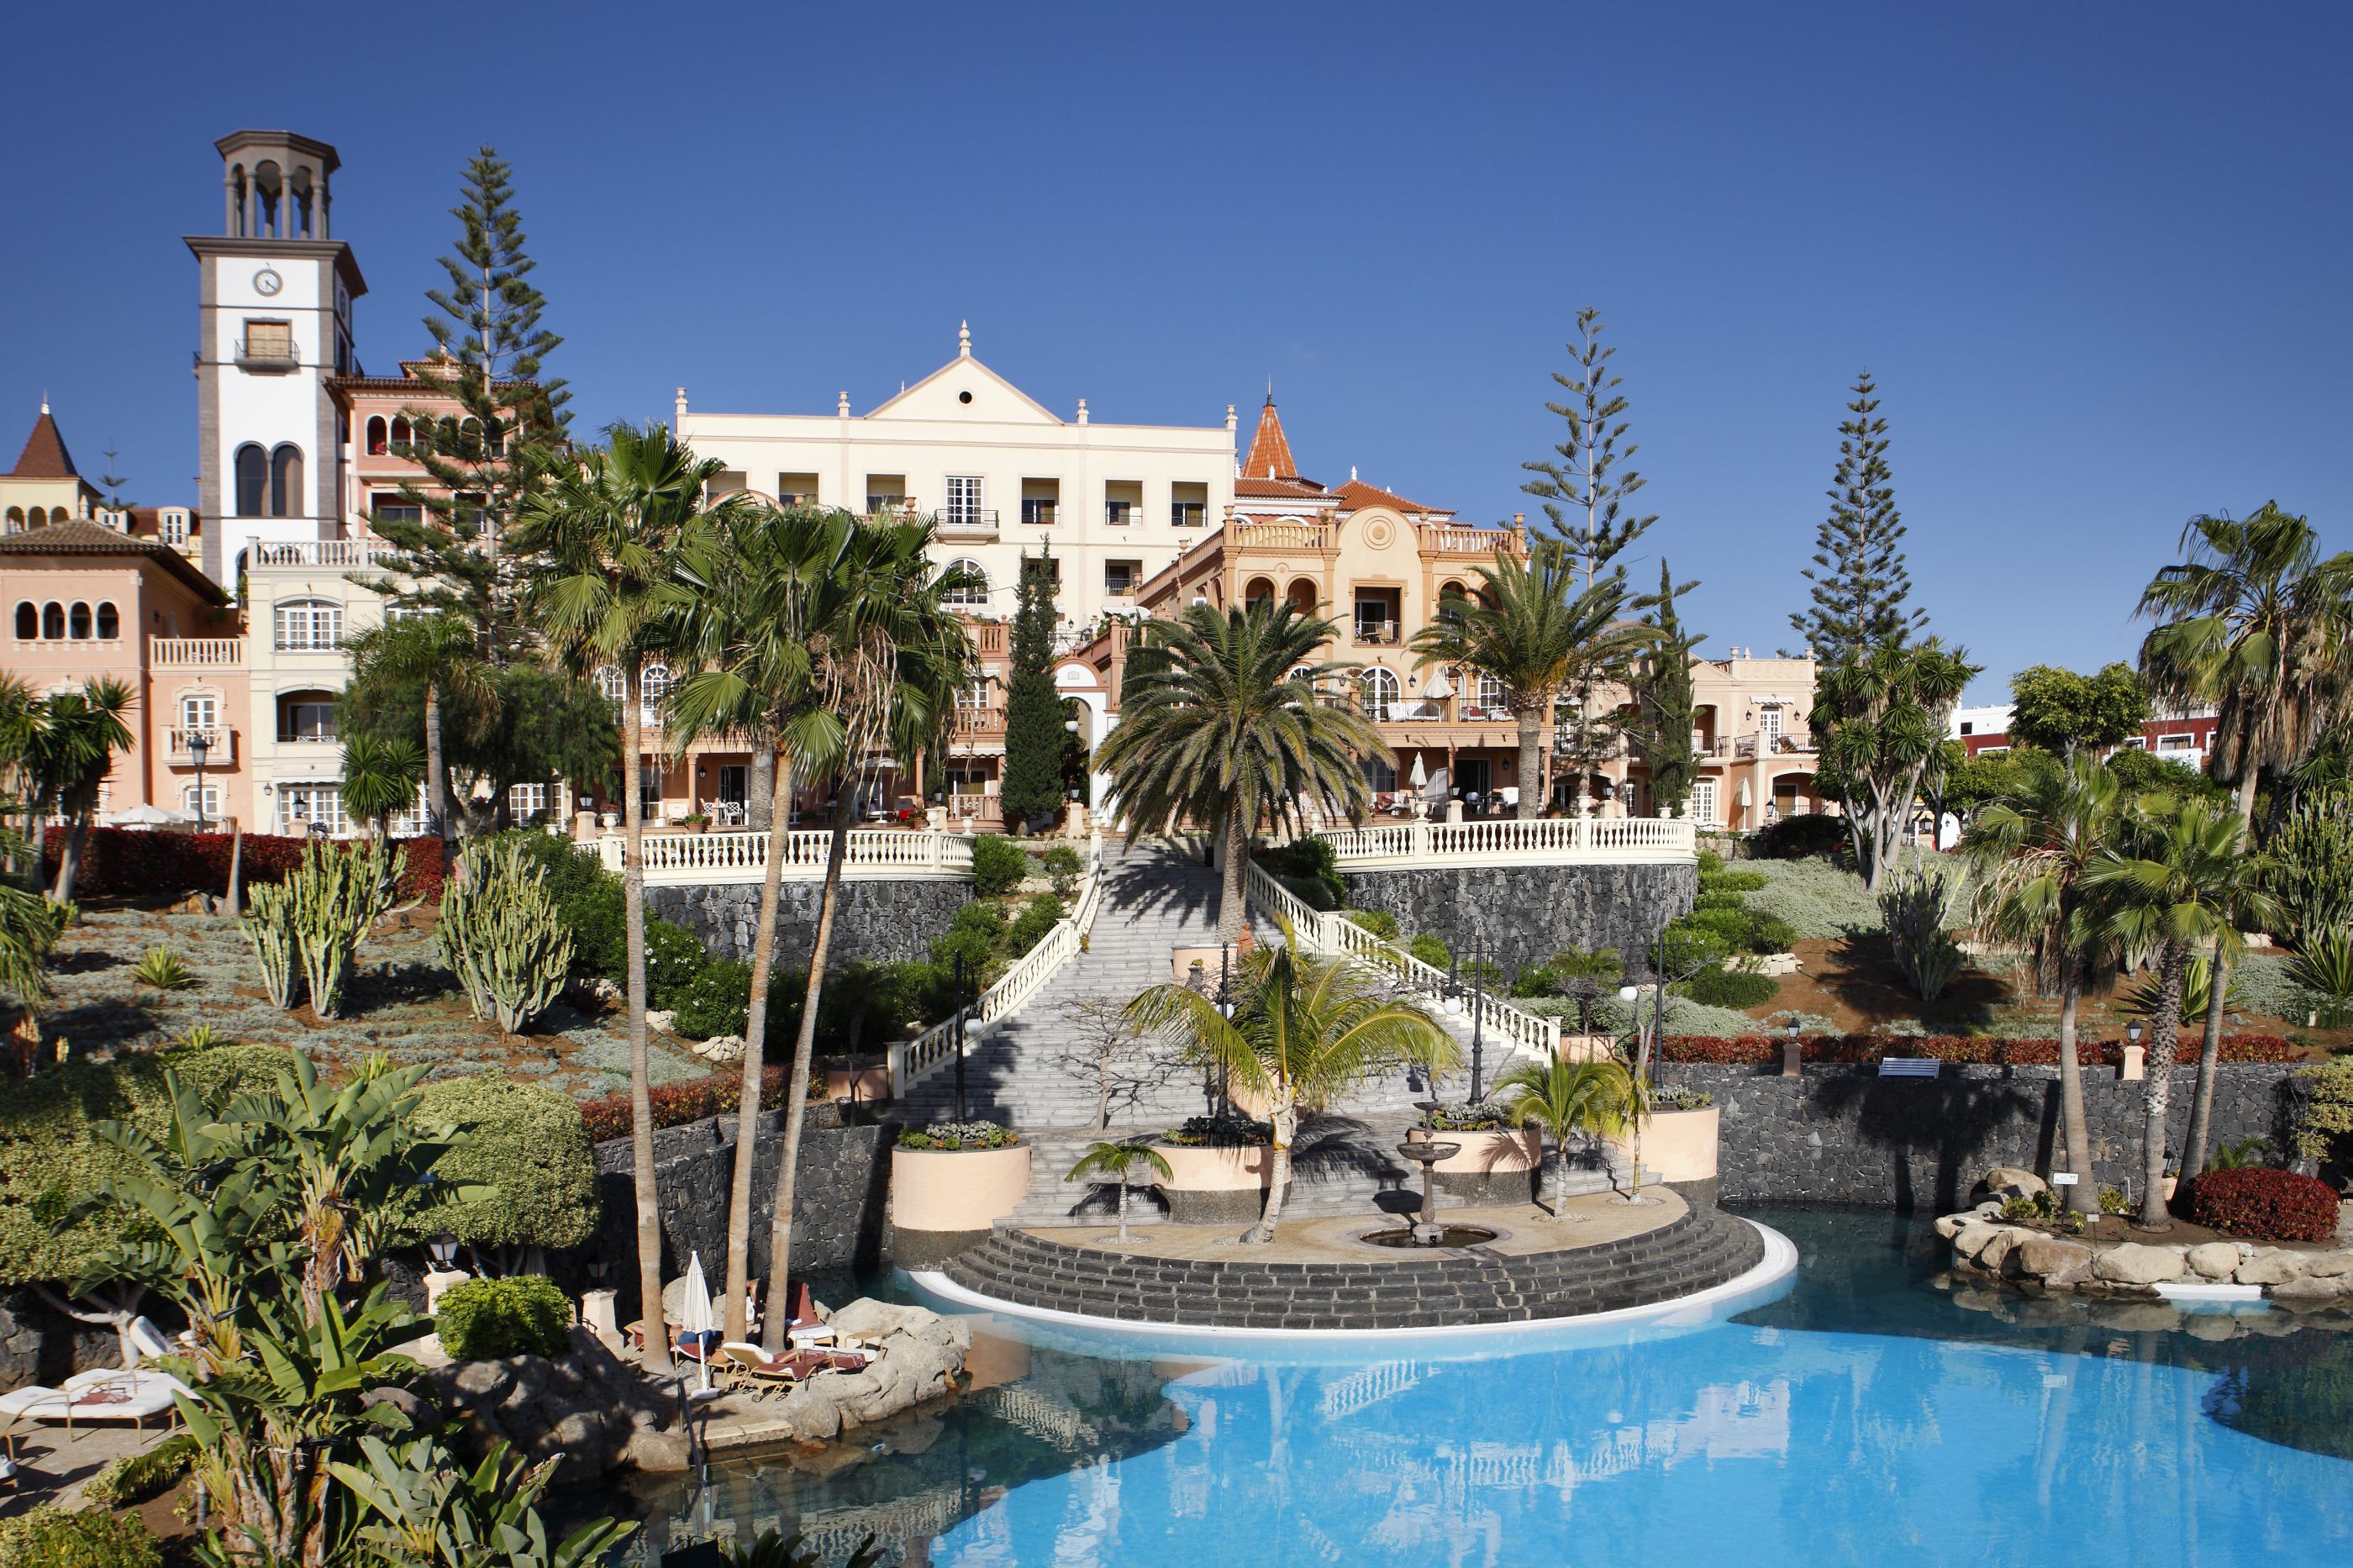 the swimming pool in front of Gran Hotel Bahia Del Duque in the Canaries, Spain 